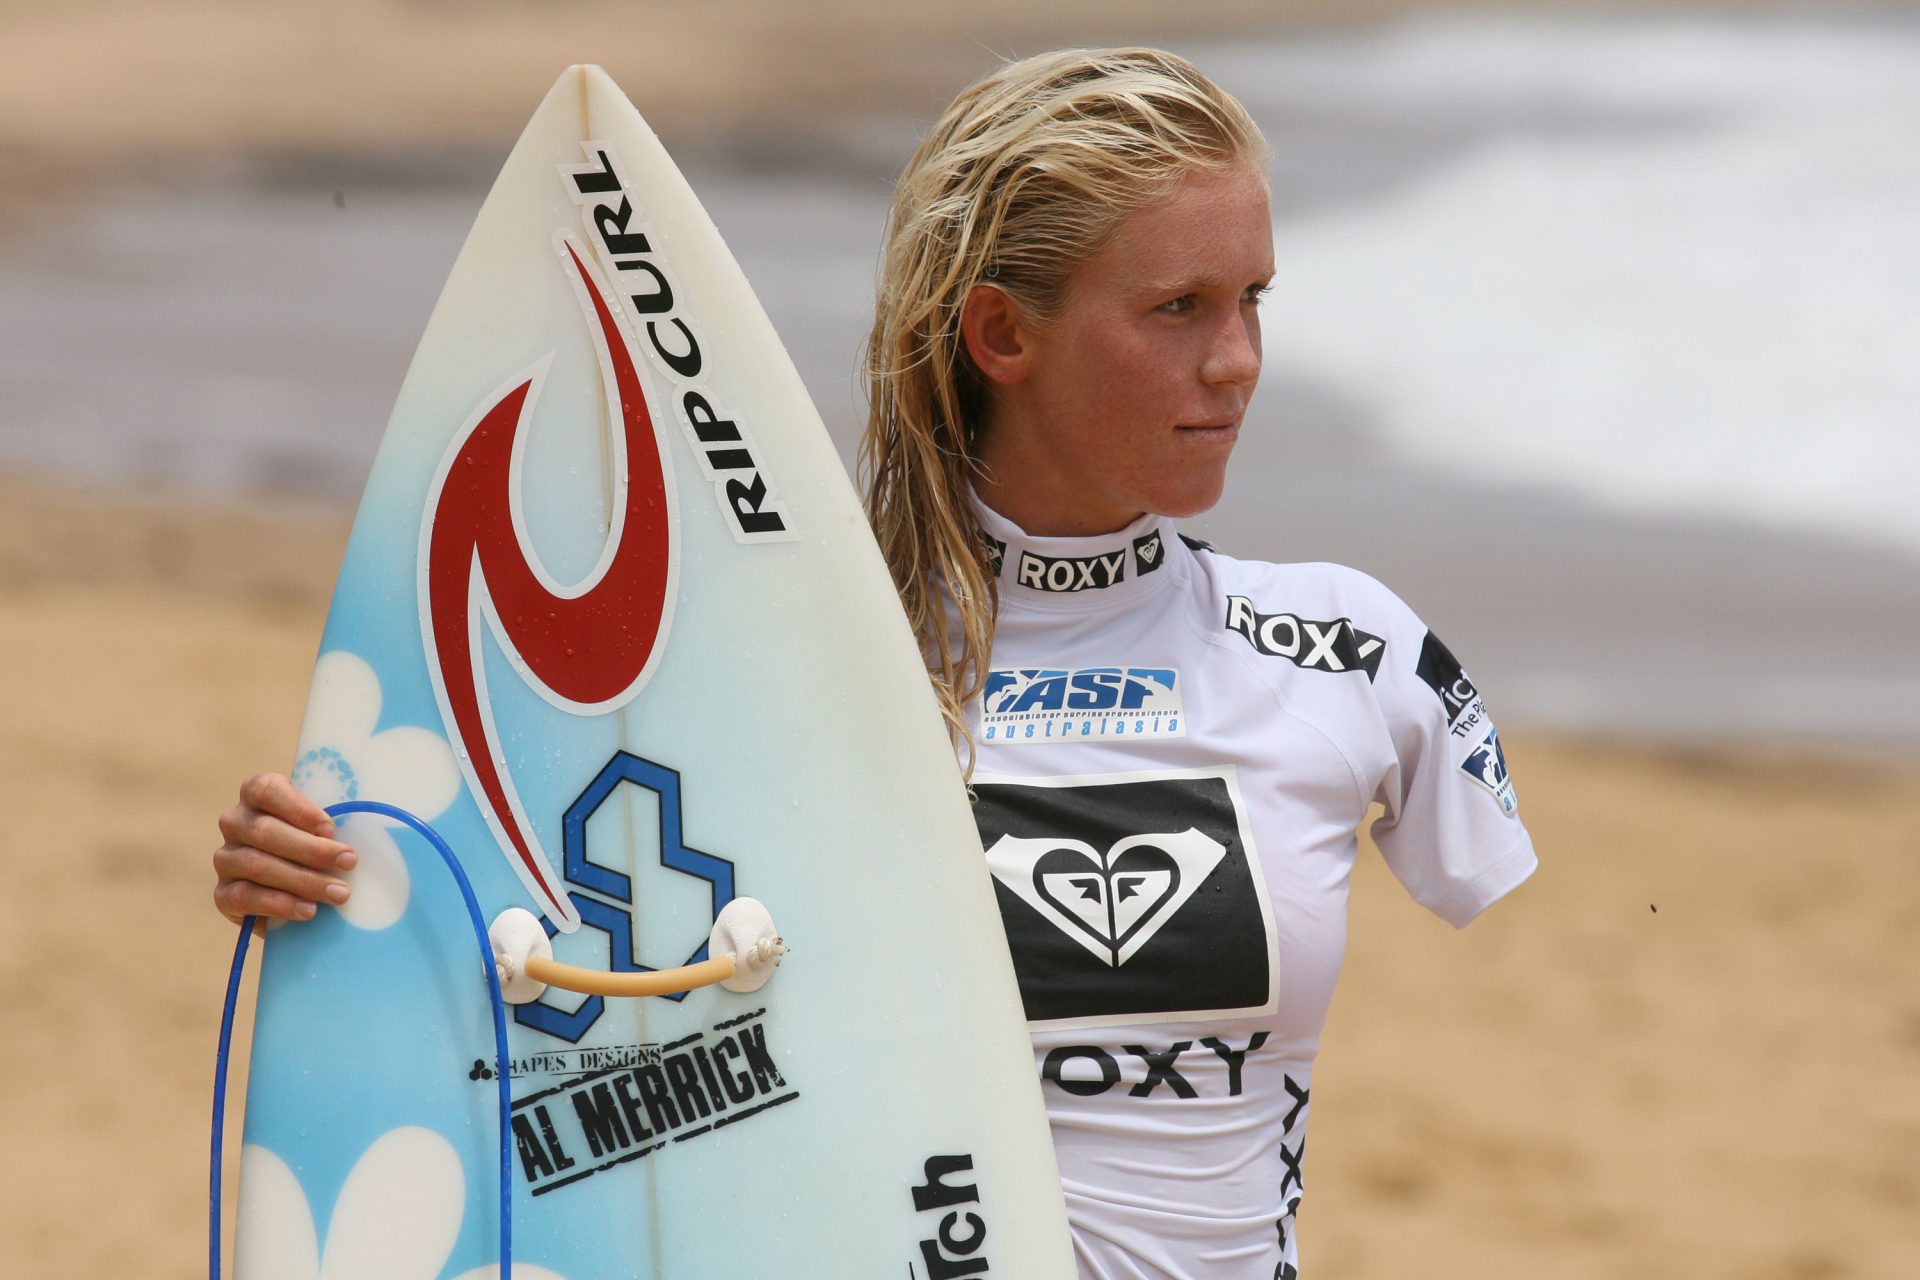 Bethany Hamilton and the shark attack that nearly took her life